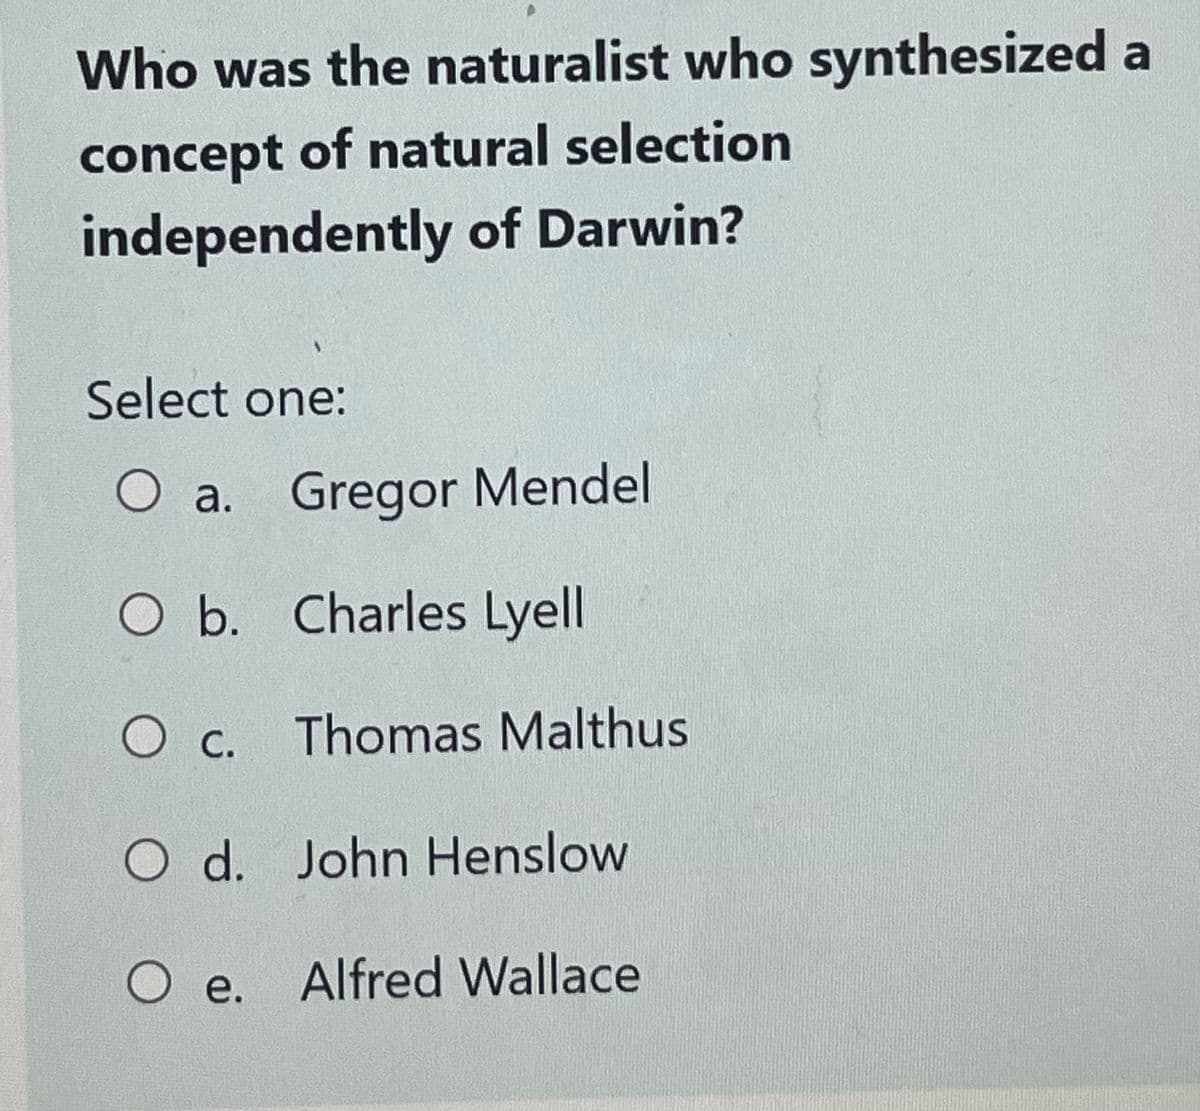 Who was the naturalist who synthesized a
concept of natural selection
independently of Darwin?
Select one:
O a. Gregor Mendel
O b. Charles Lyell
O c. Thomas Malthus
O d.
John Henslow
O e. Alfred Wallace